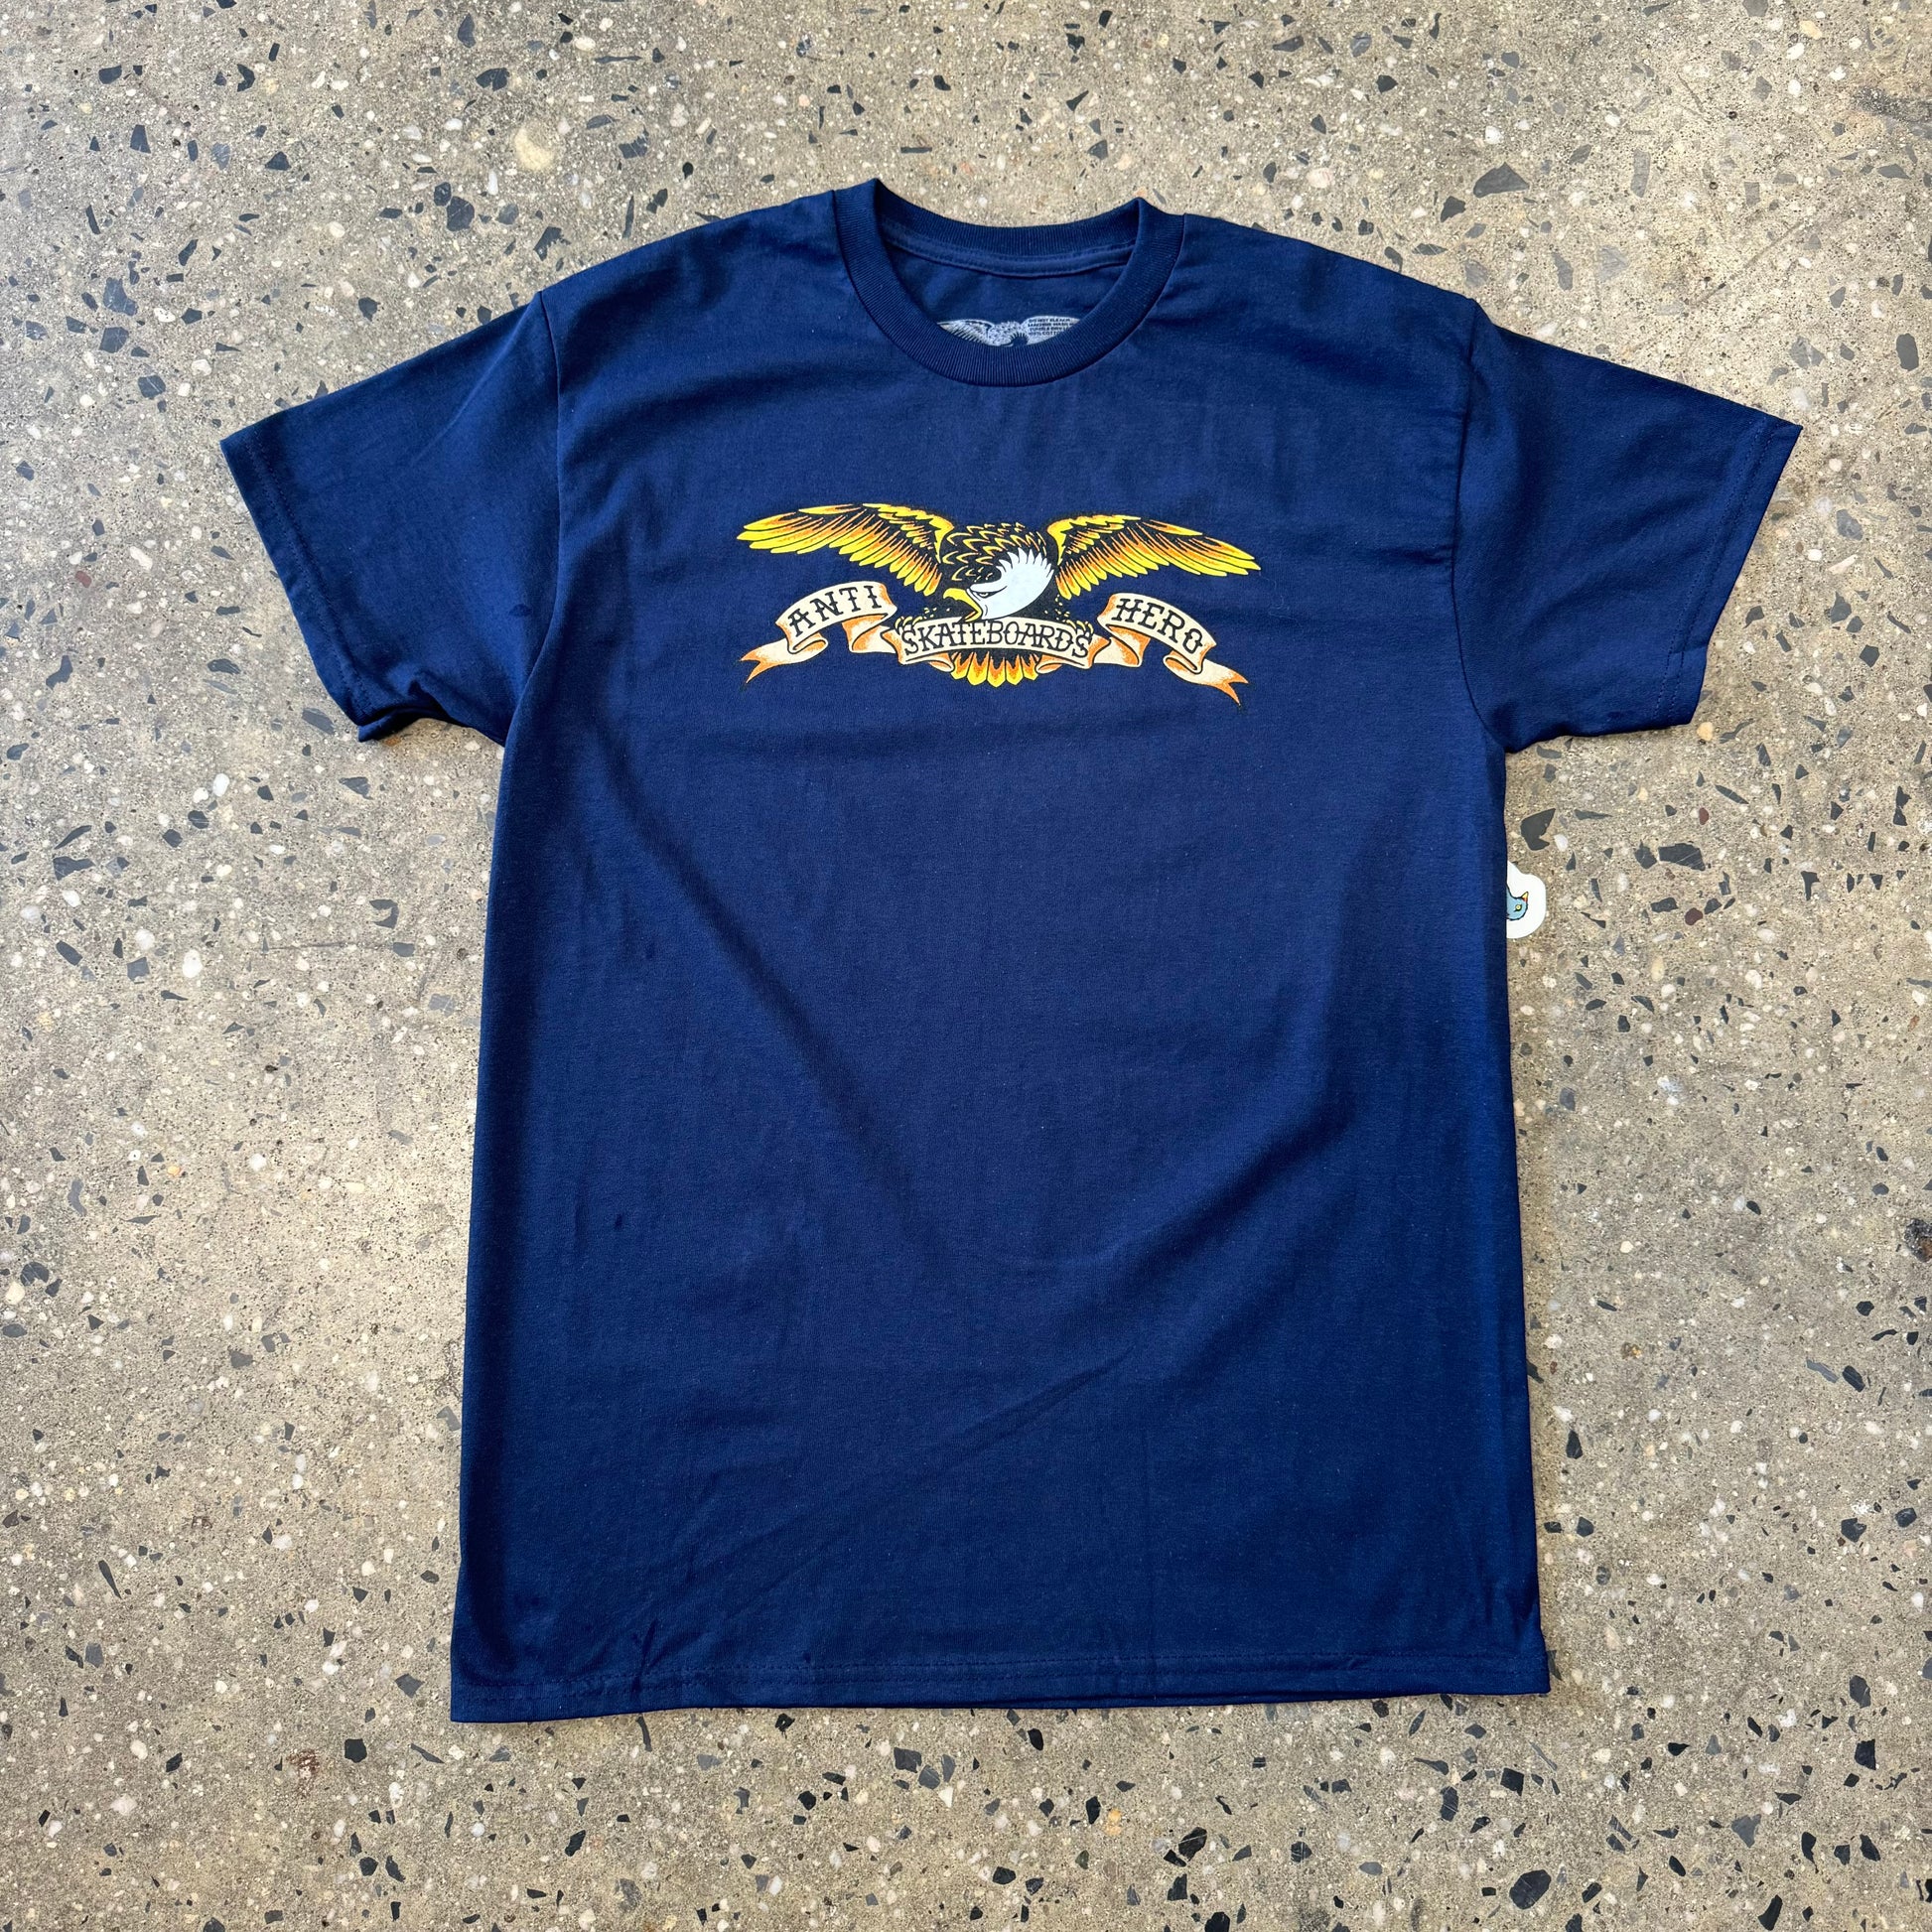 navy blue t shirt with eagle in the center of the chest